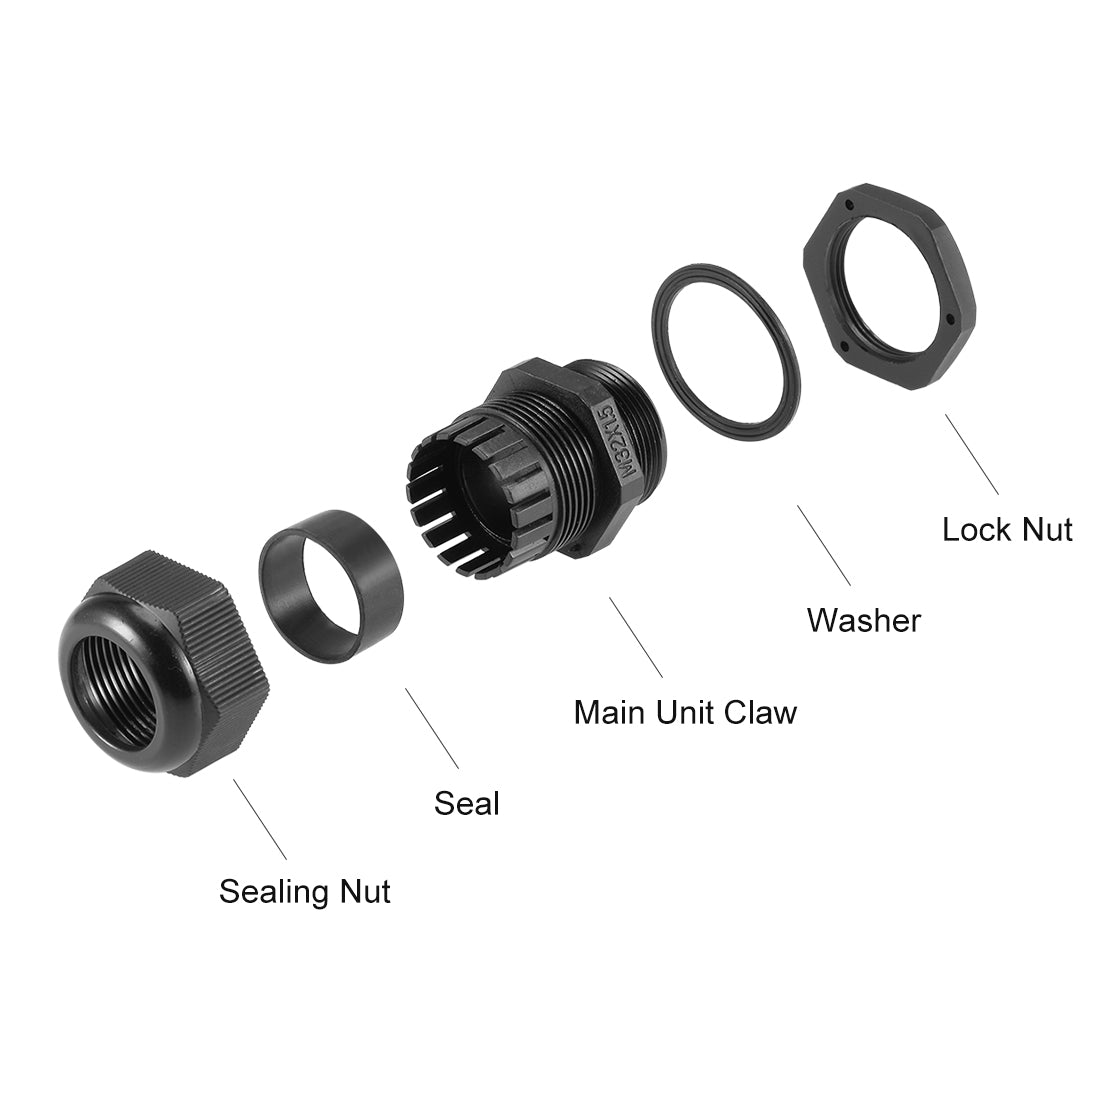 uxcell Uxcell M32x1.5 Cable Gland 16mm-21mm Wire Hole Waterproof Nylon Joint Adjustable Locknut with Washer Black 20pcs